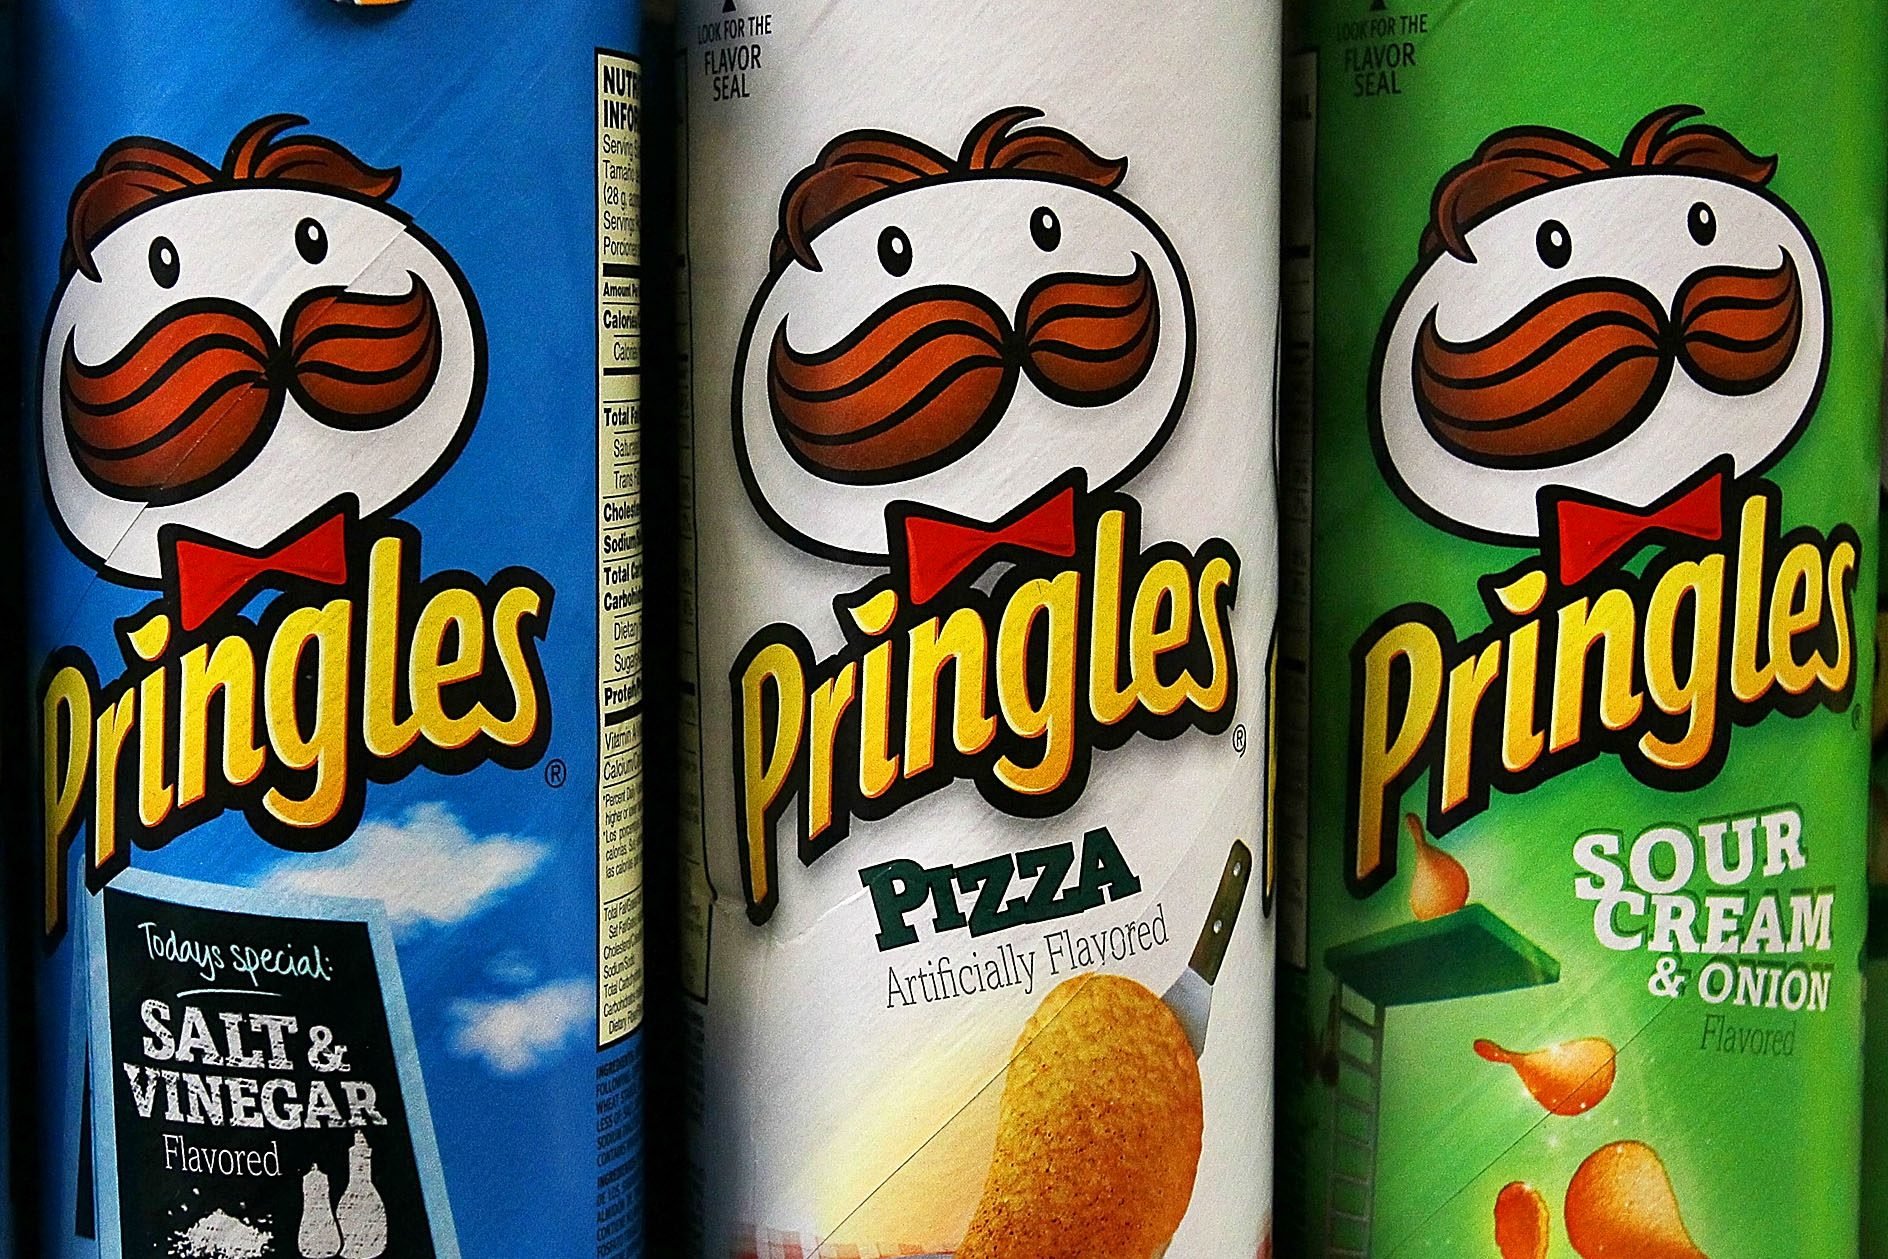 Who Is the Pringles Man? The History Behind Pringles Mascot Readers Digest pic